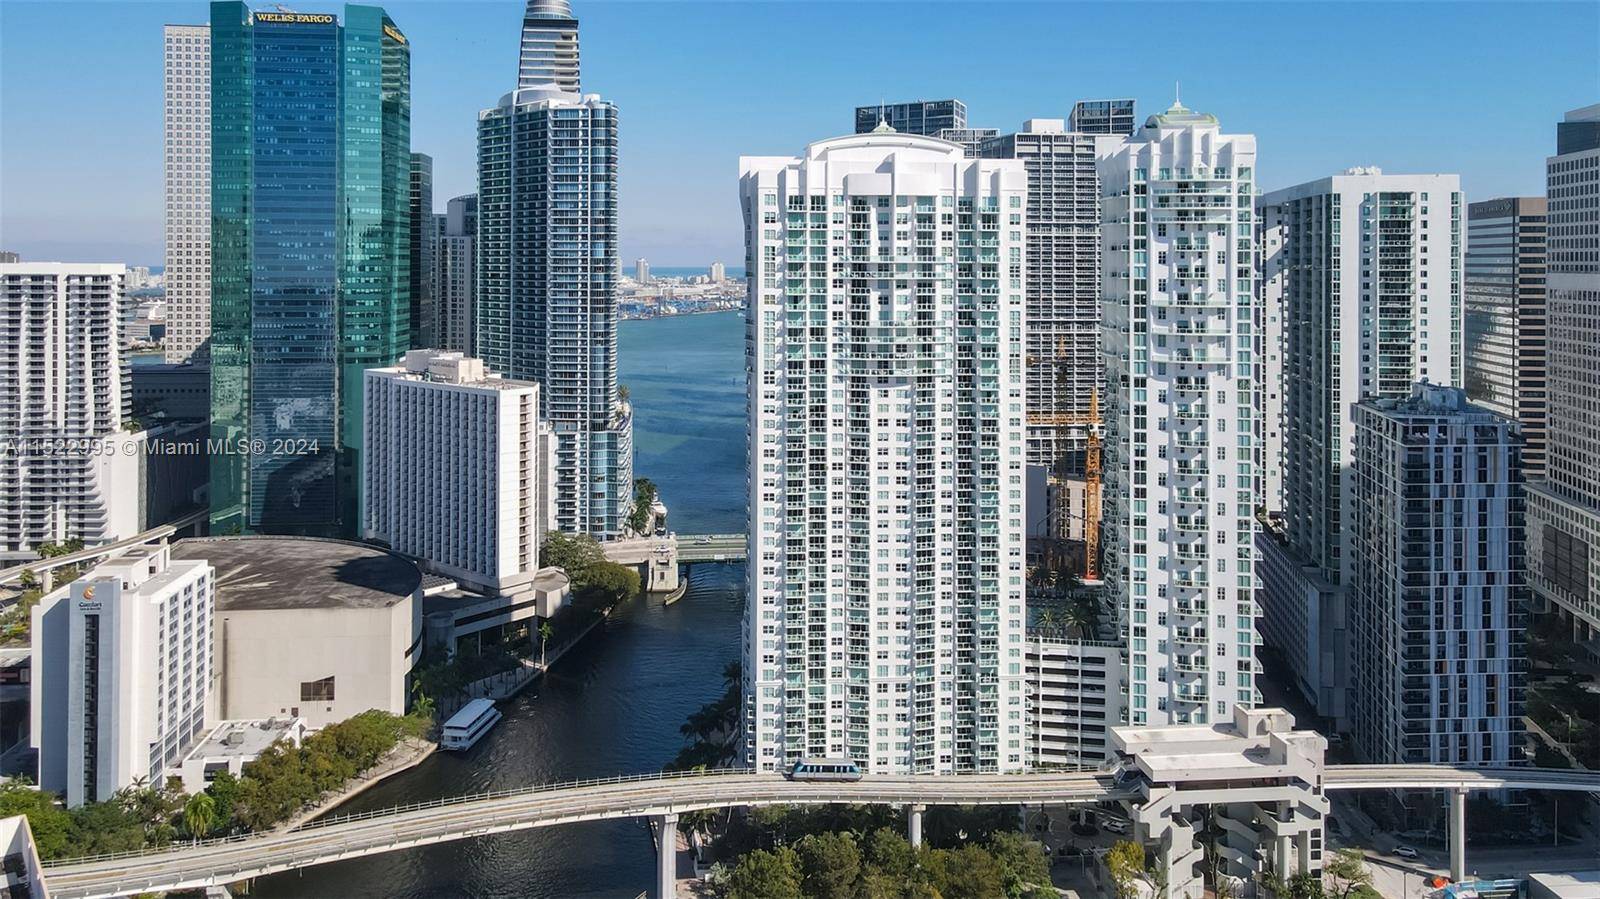 Spacious 2 2 Brickell corner unit with TWO STORAGE SPACES, PARKING ON THE SAME FLOOR, 3 large balconies overlooking the Miami River !